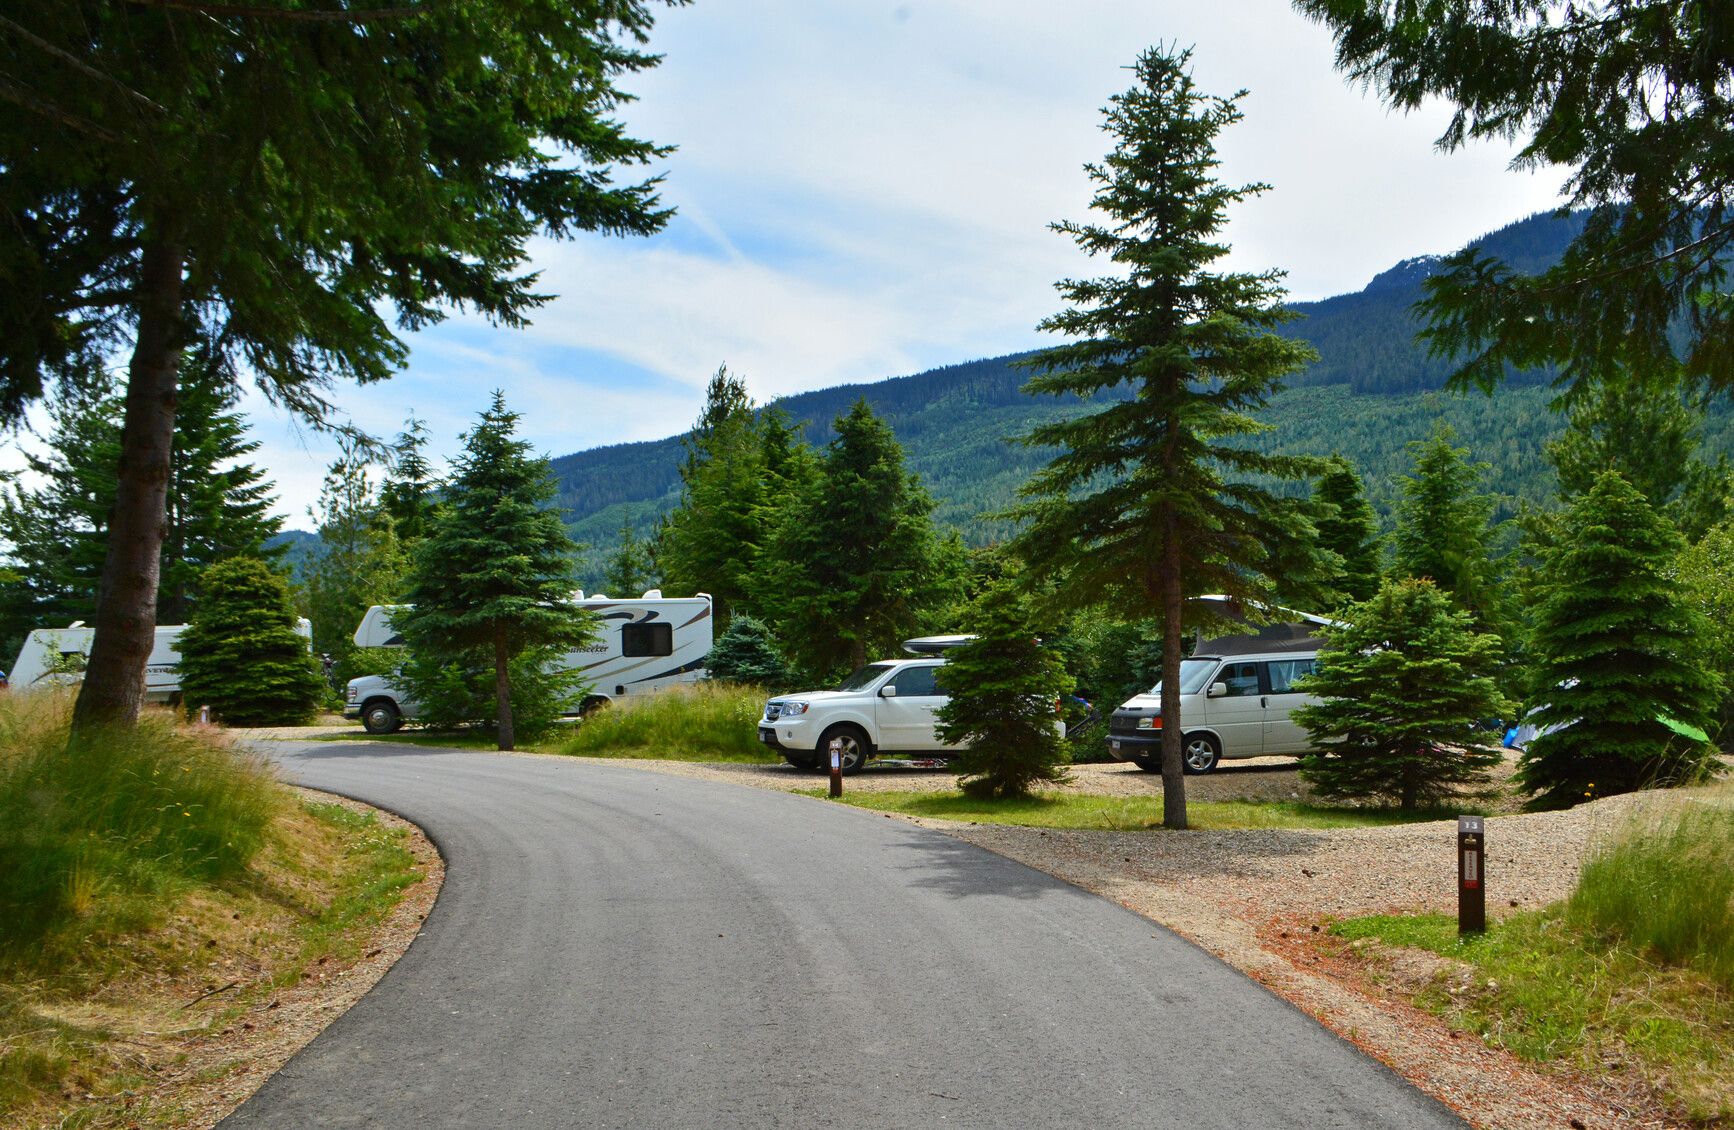 Campsites and a paved road leading through the campground in Martha Creek Park.